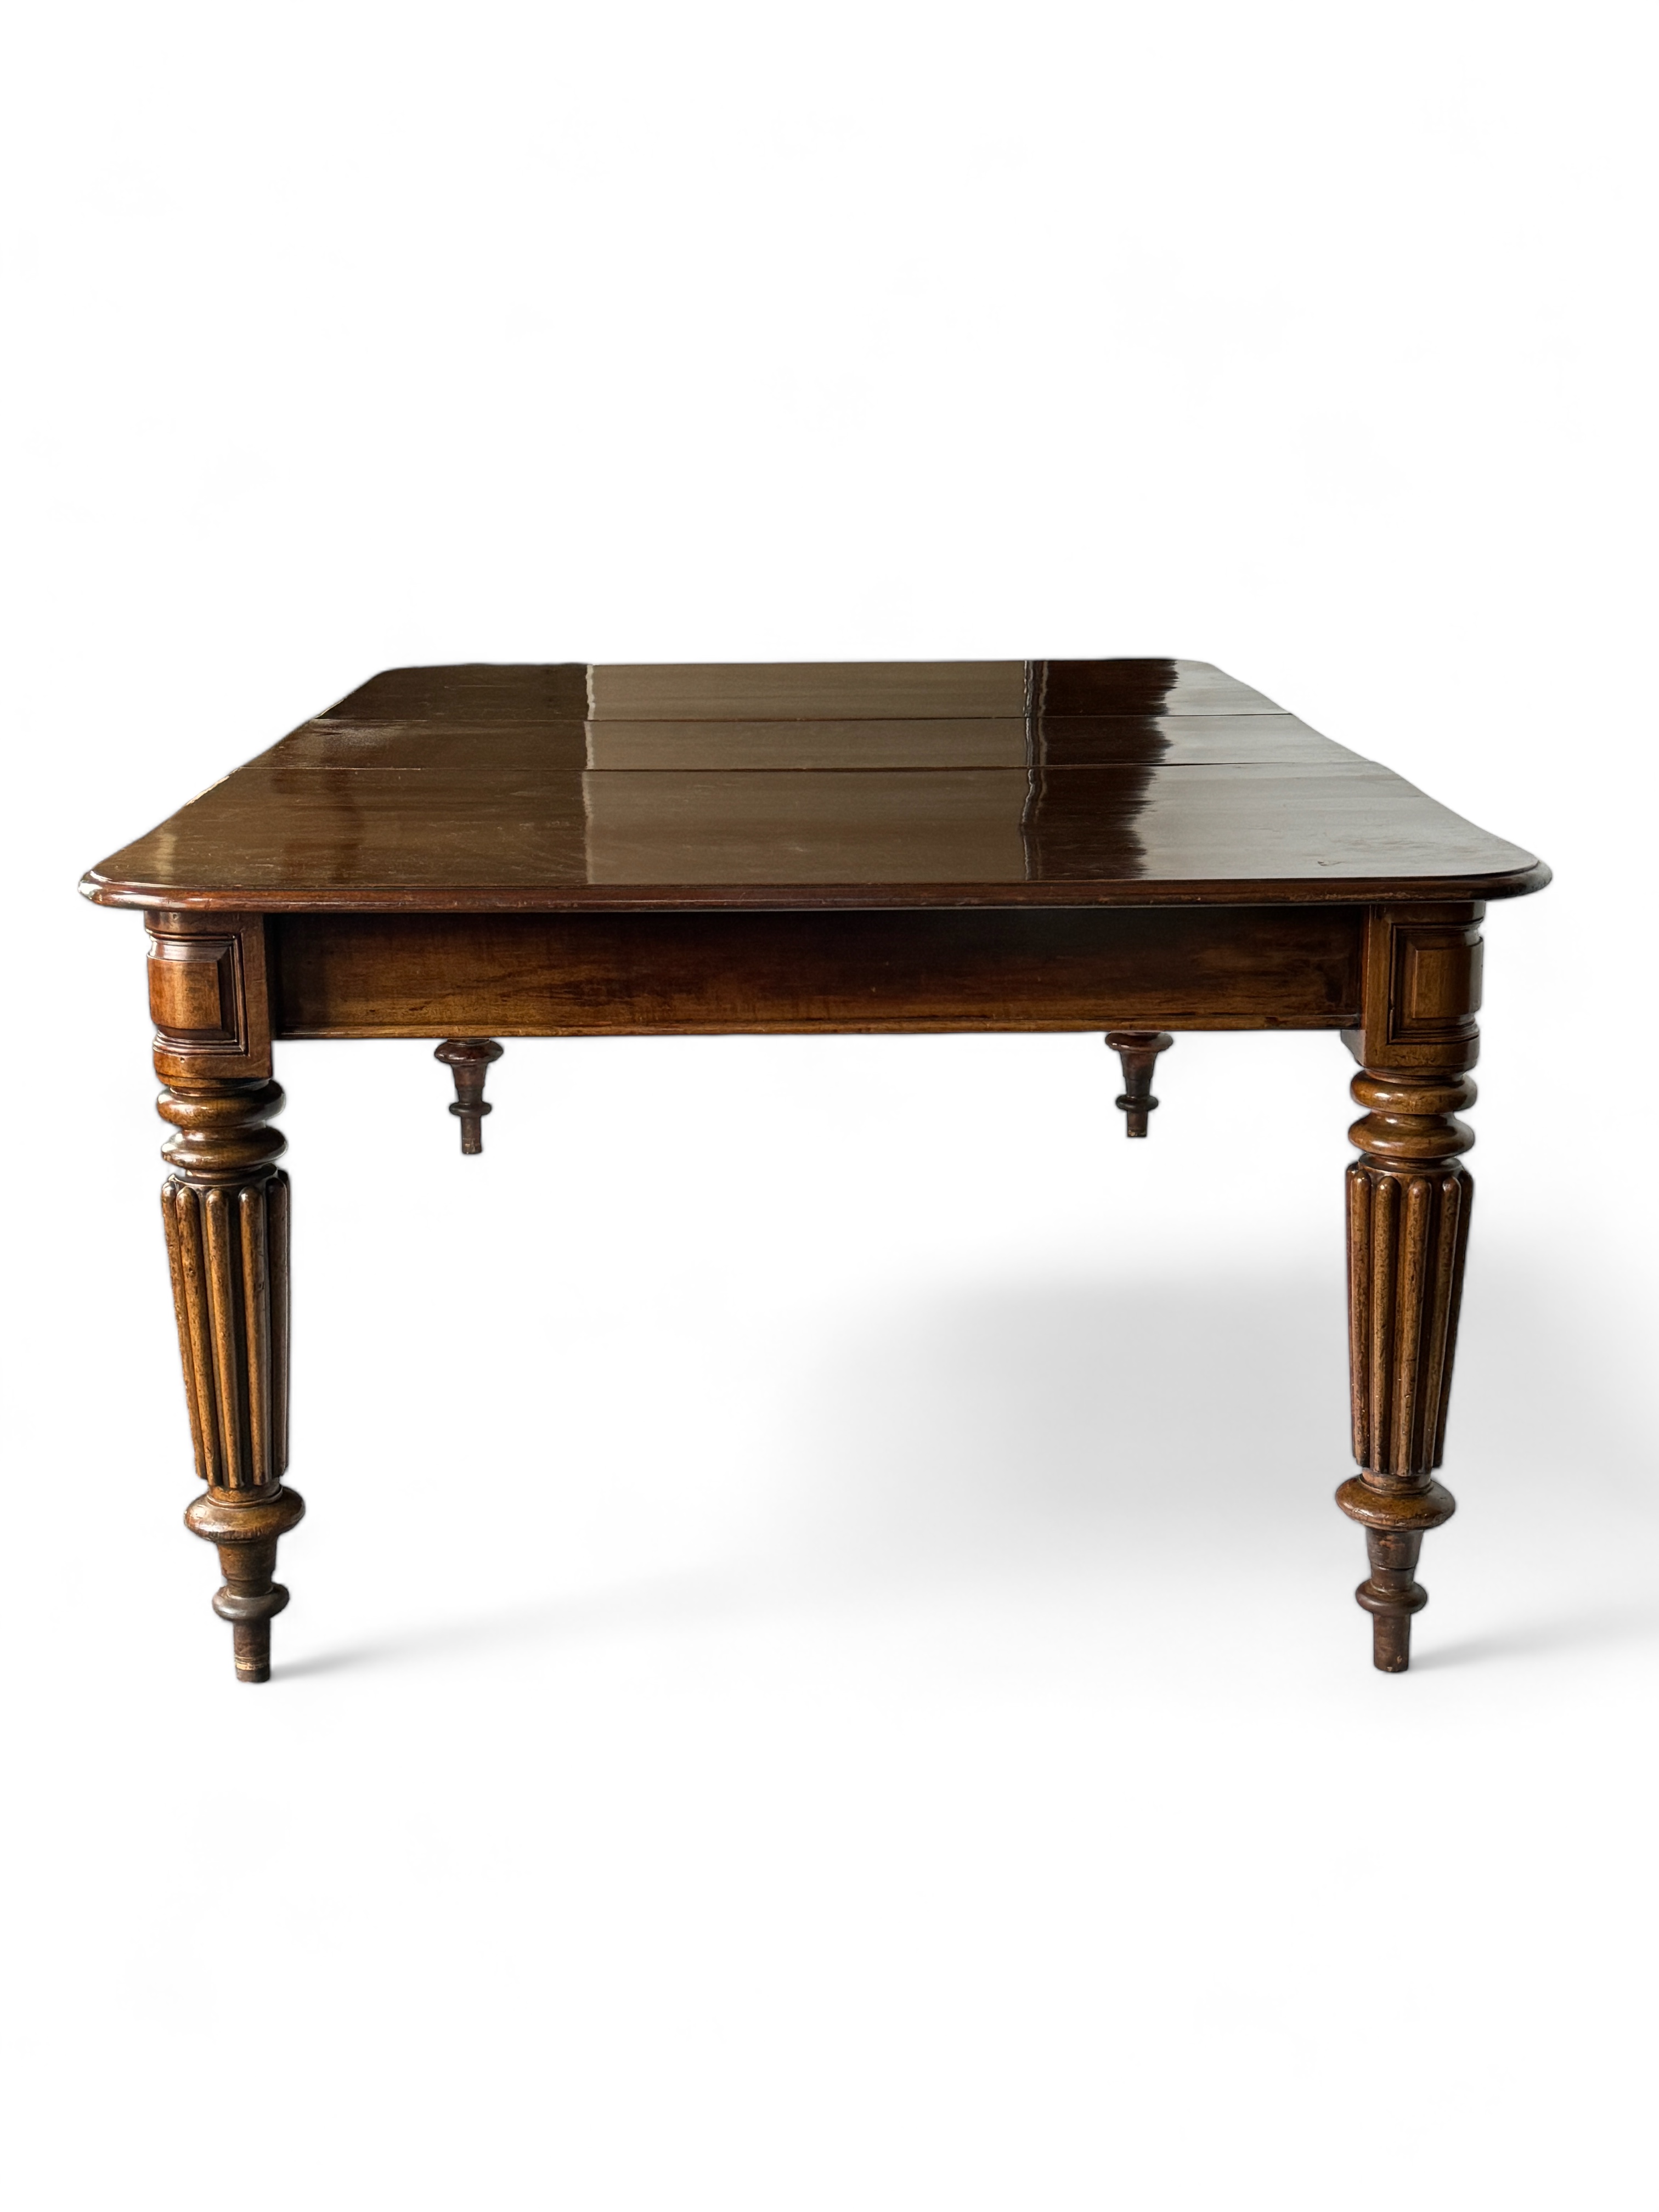 A William IV mahogany dining table - Image 4 of 4